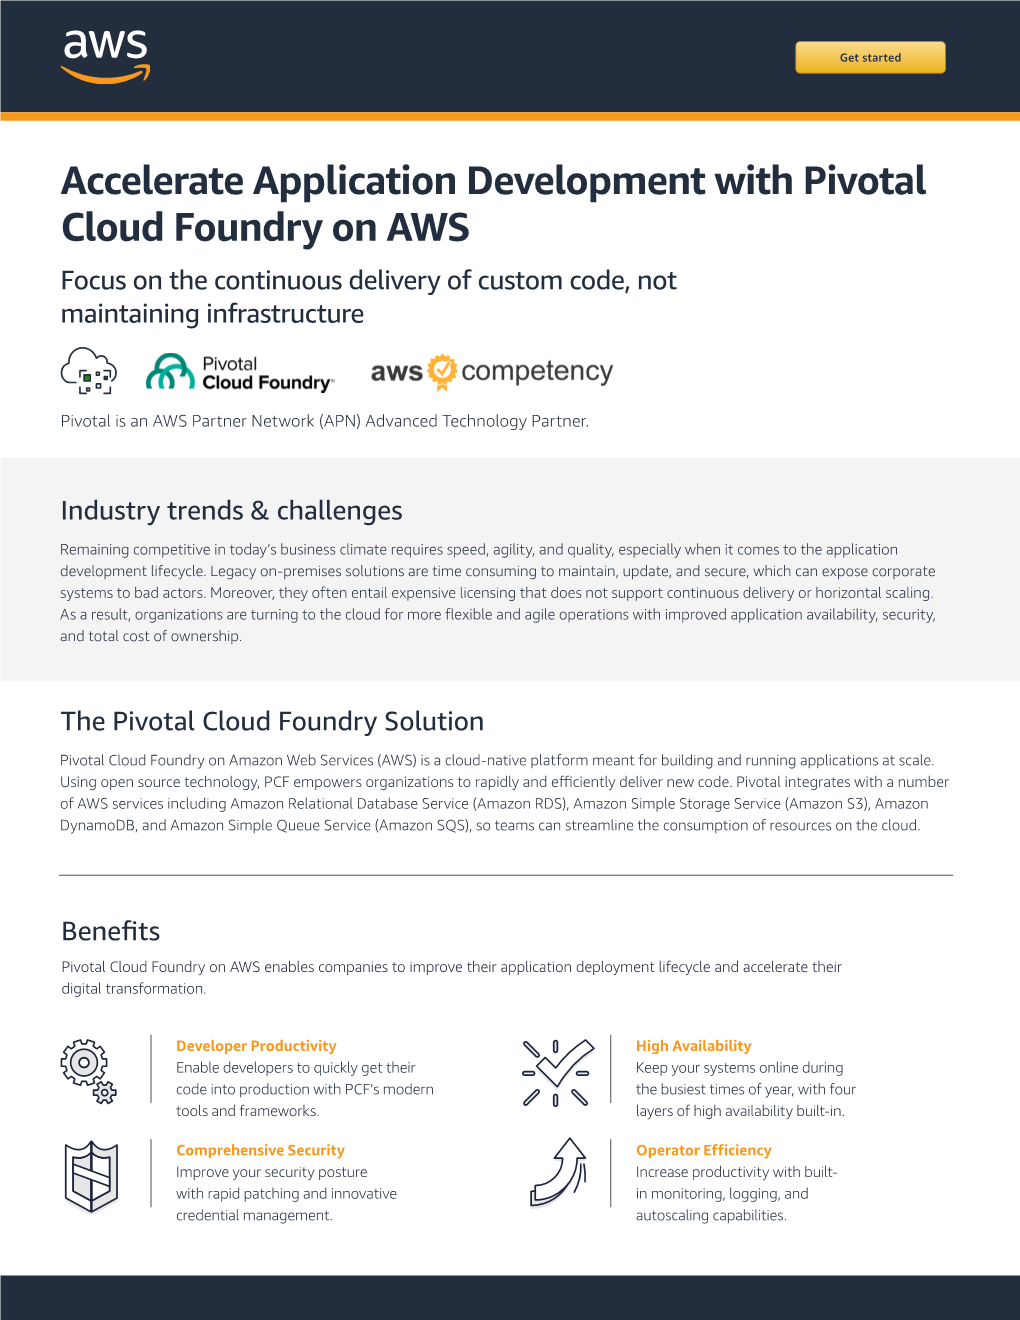 Accelerate Application Development with Pivotal Cloud Foundry on AWS Focus on the Continuous Delivery of Custom Code, Not Maintaining Infrastructure